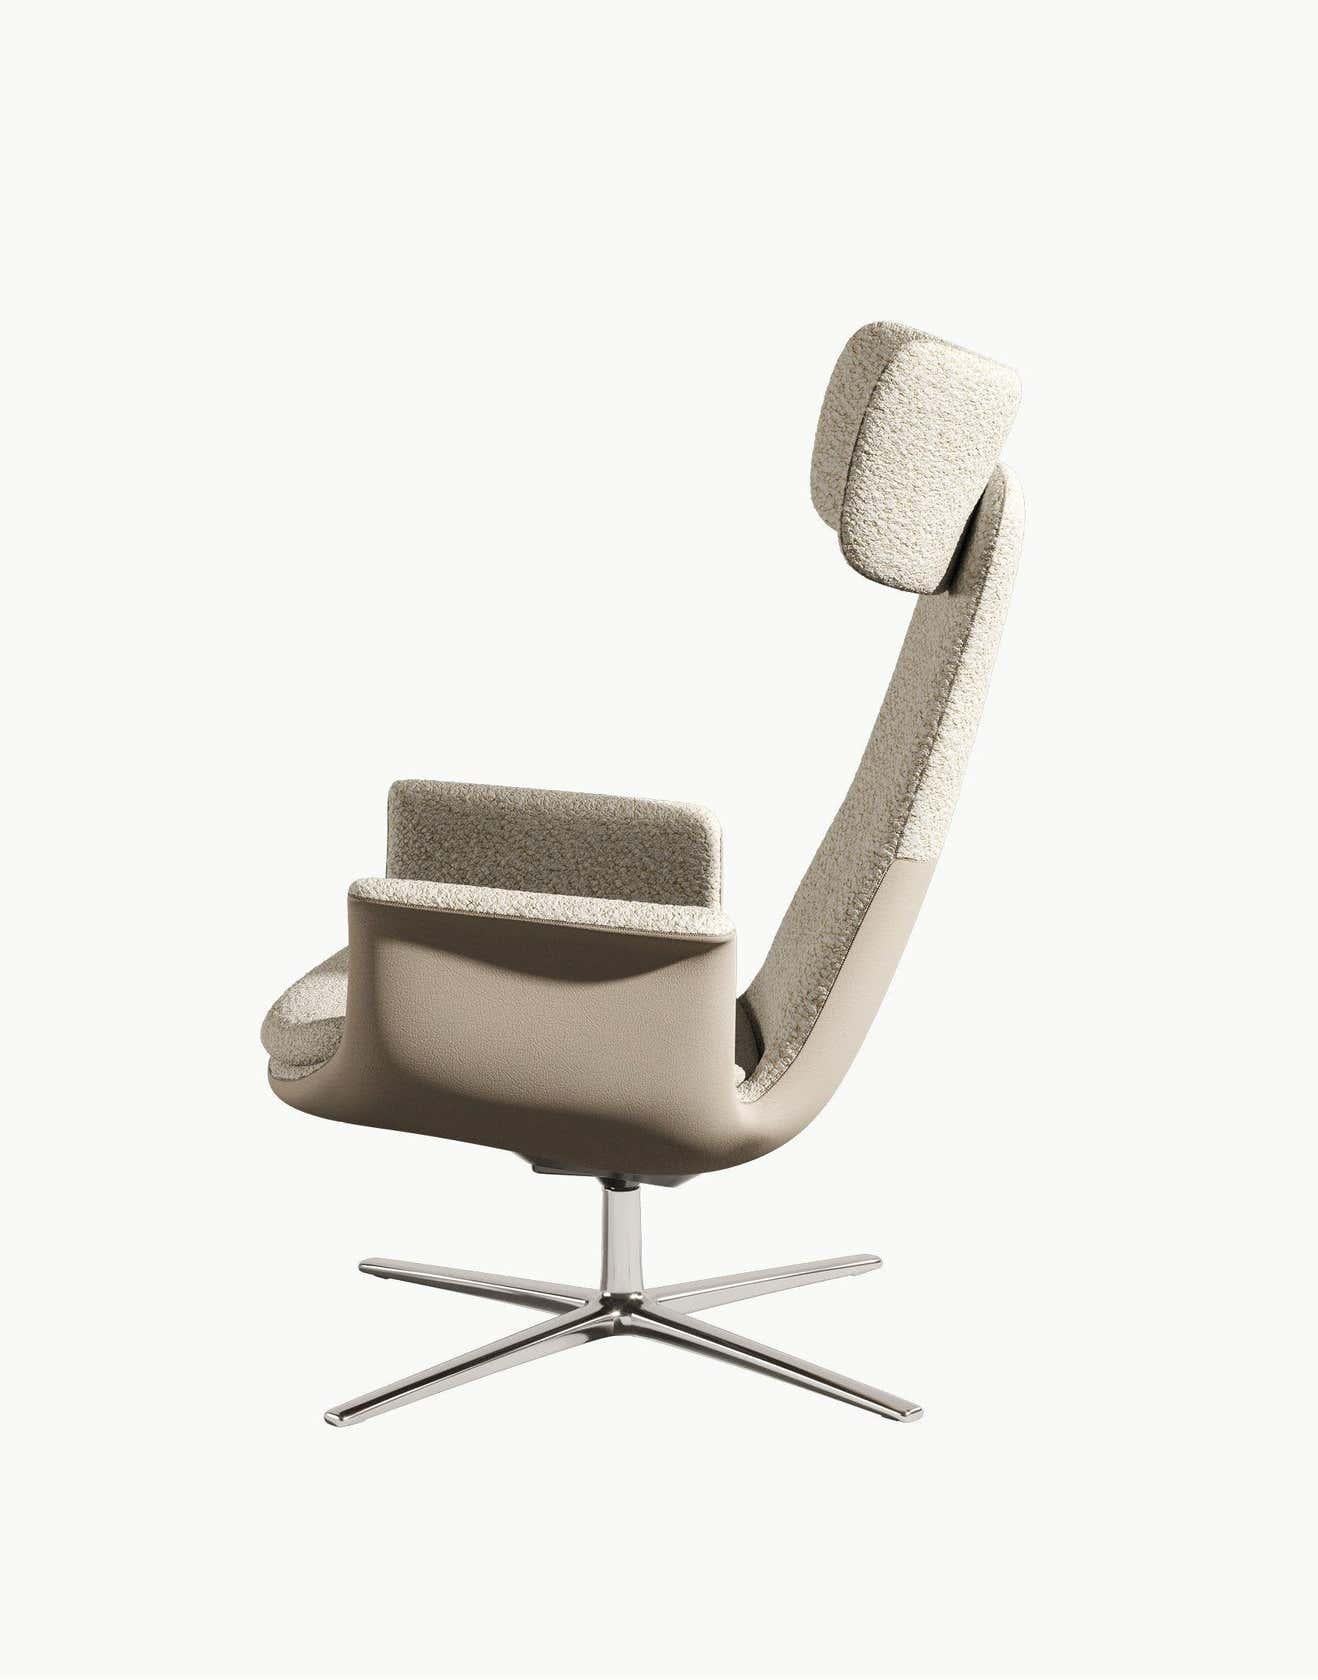 Modern White Odyssey Armchair Adjustable Headrest Leather & Fabric Finish For Sale